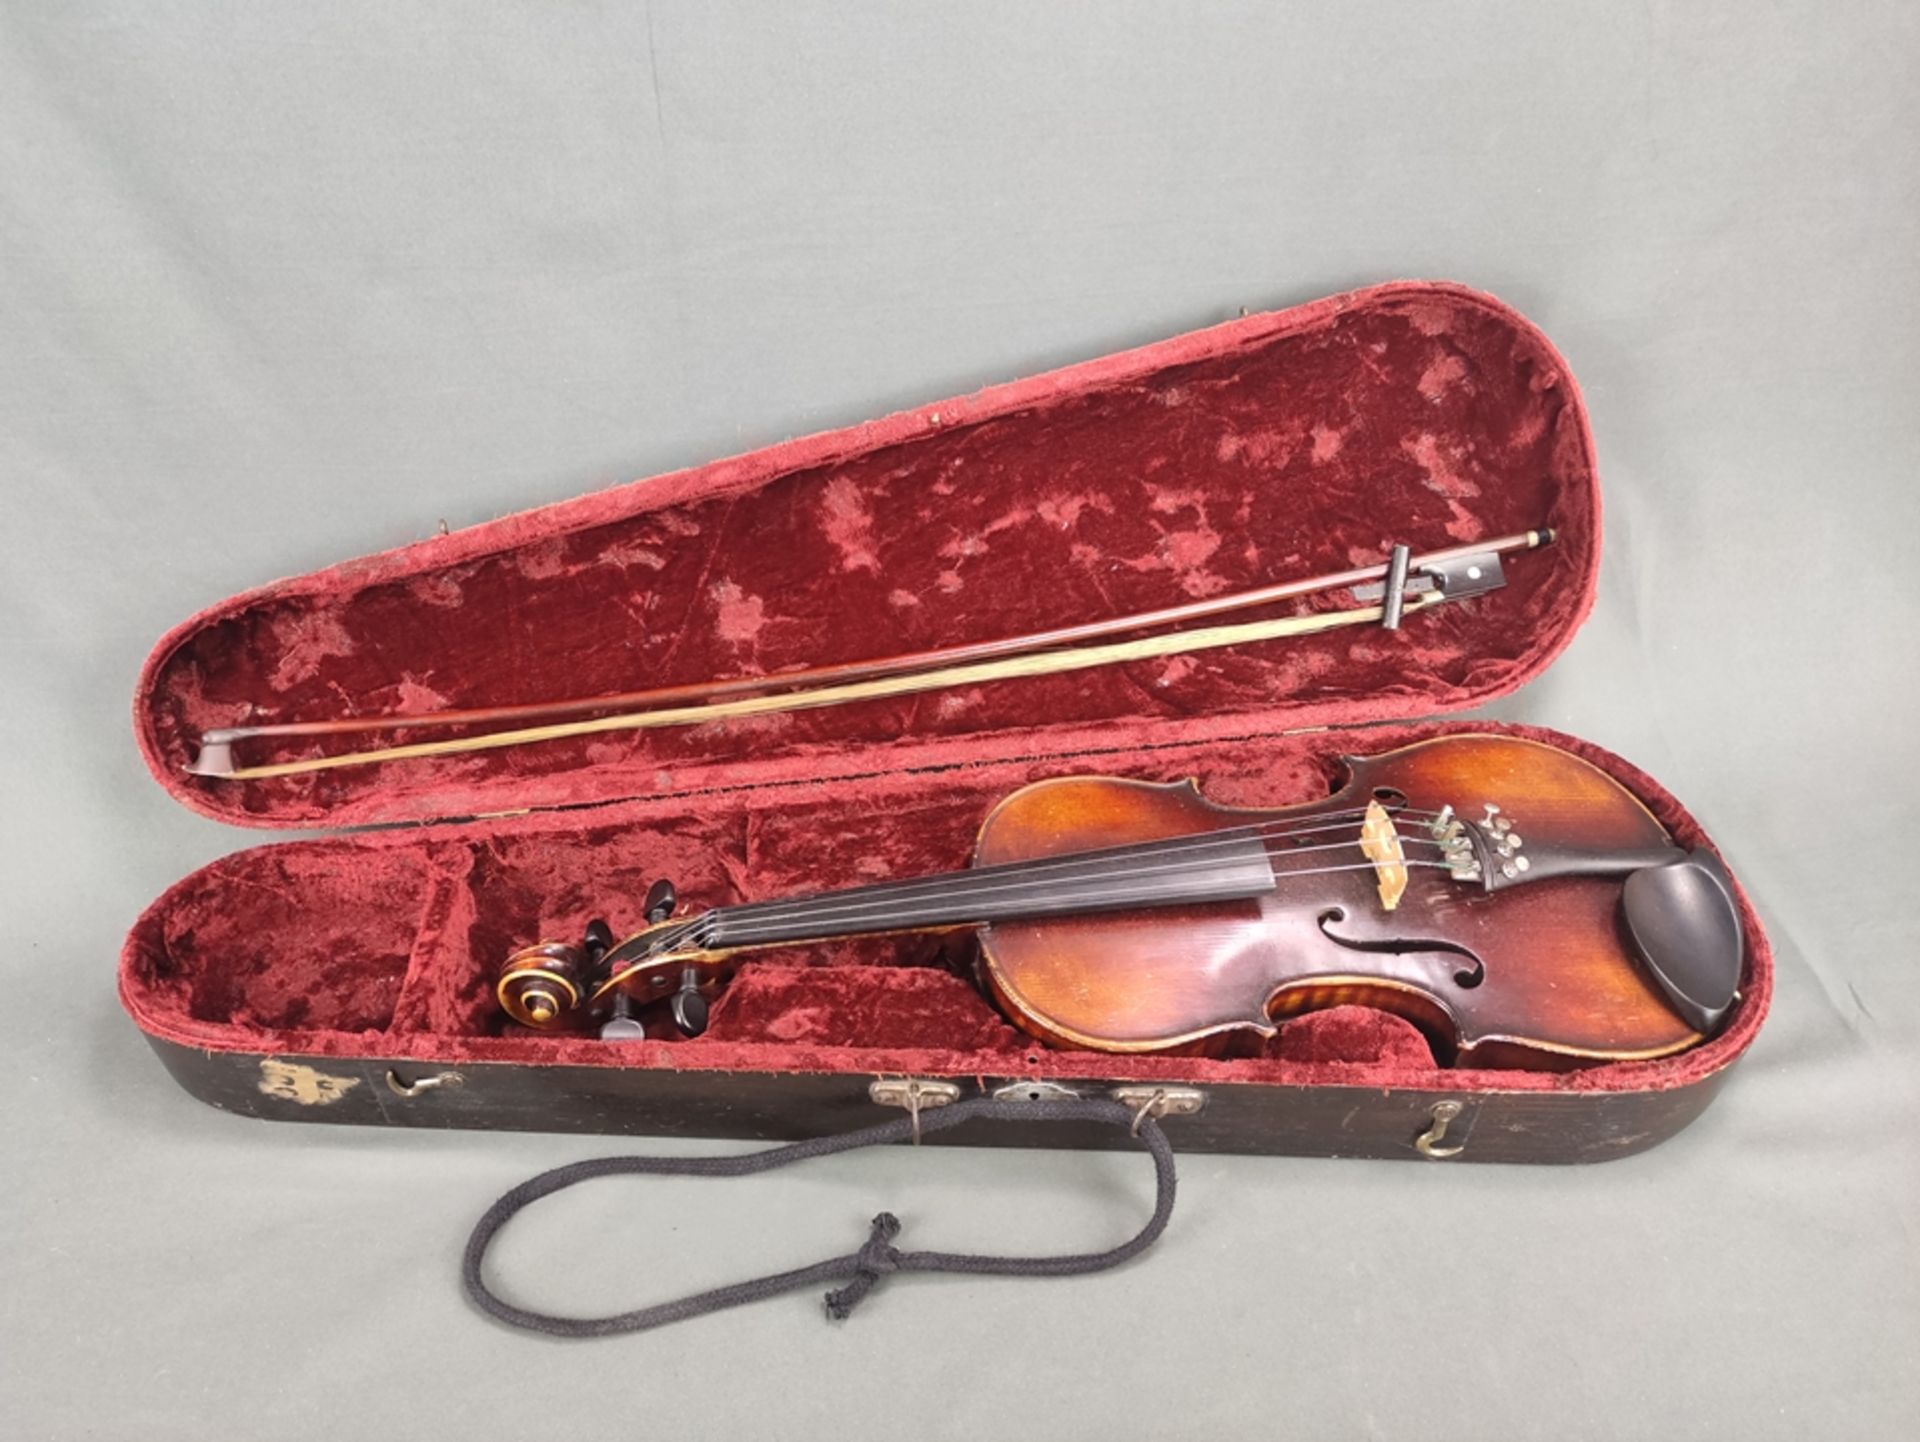 Violin, marked "Aubert" on the bridge, inside with label "Jühling Dresden 1891", with chinrest, in 